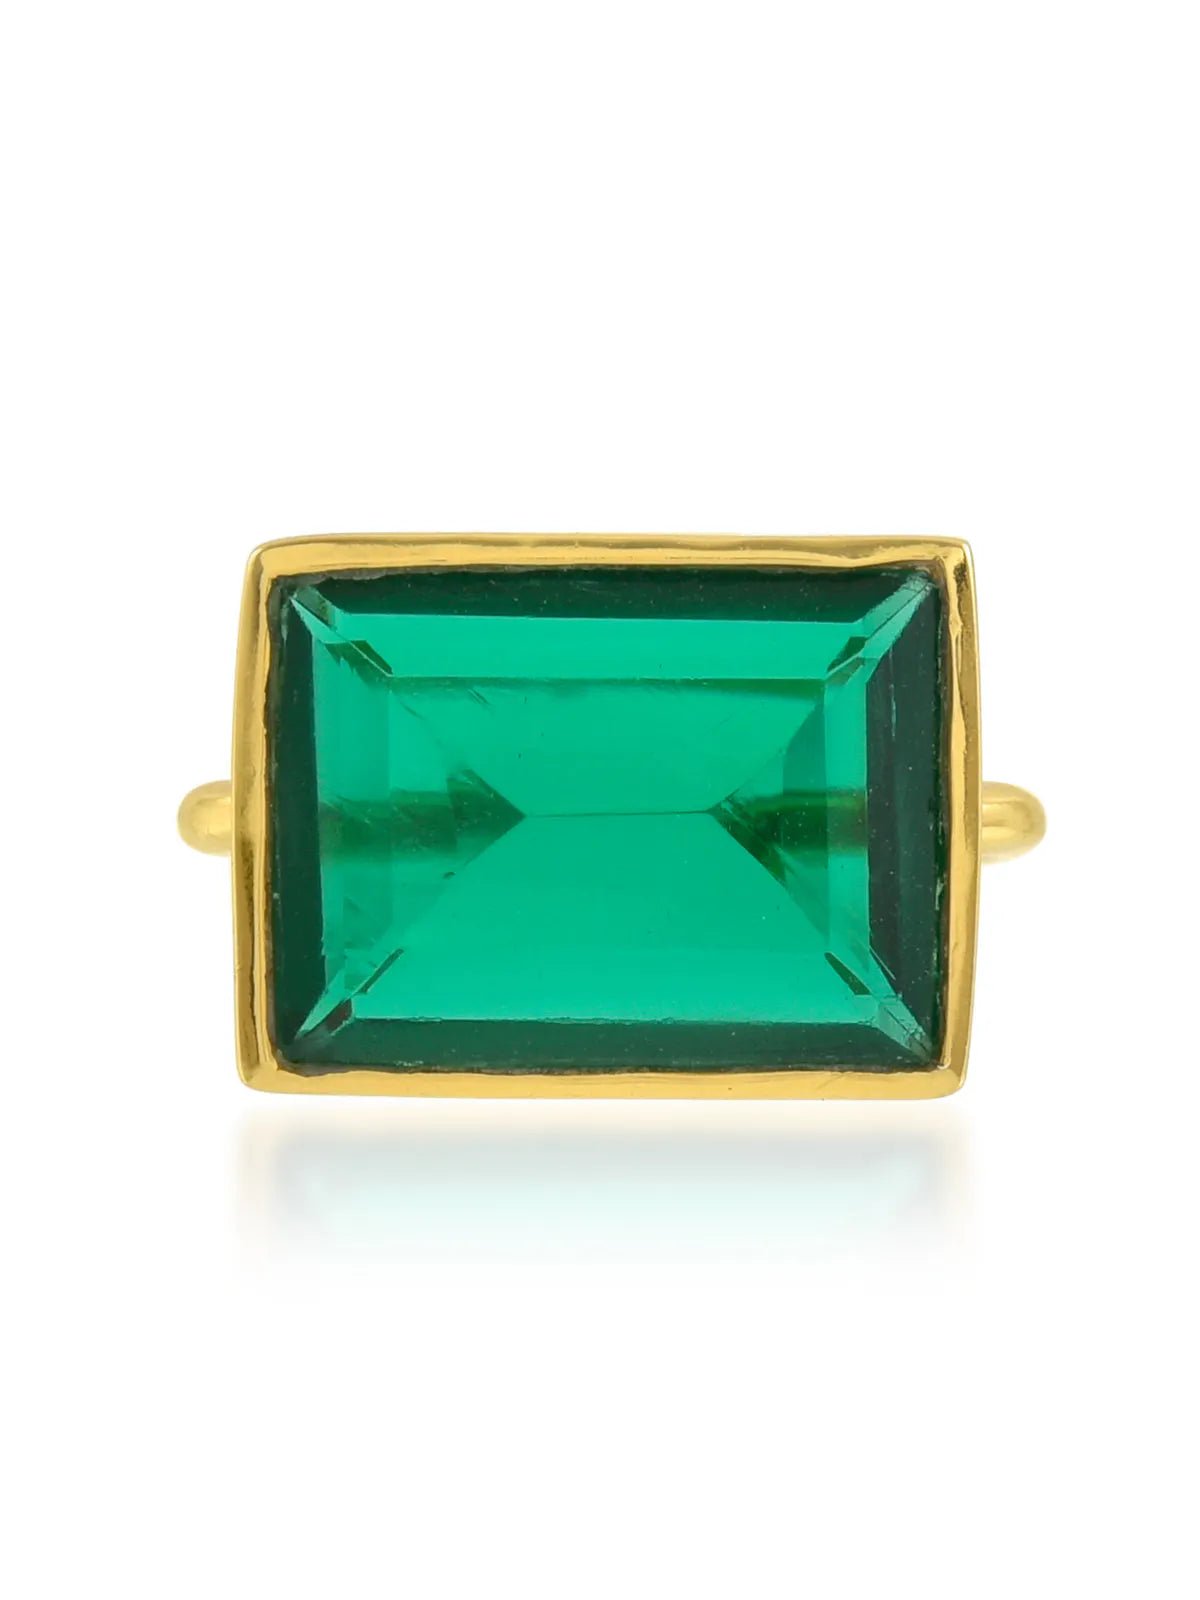 Lenny Ring in Emerald Green - Collected